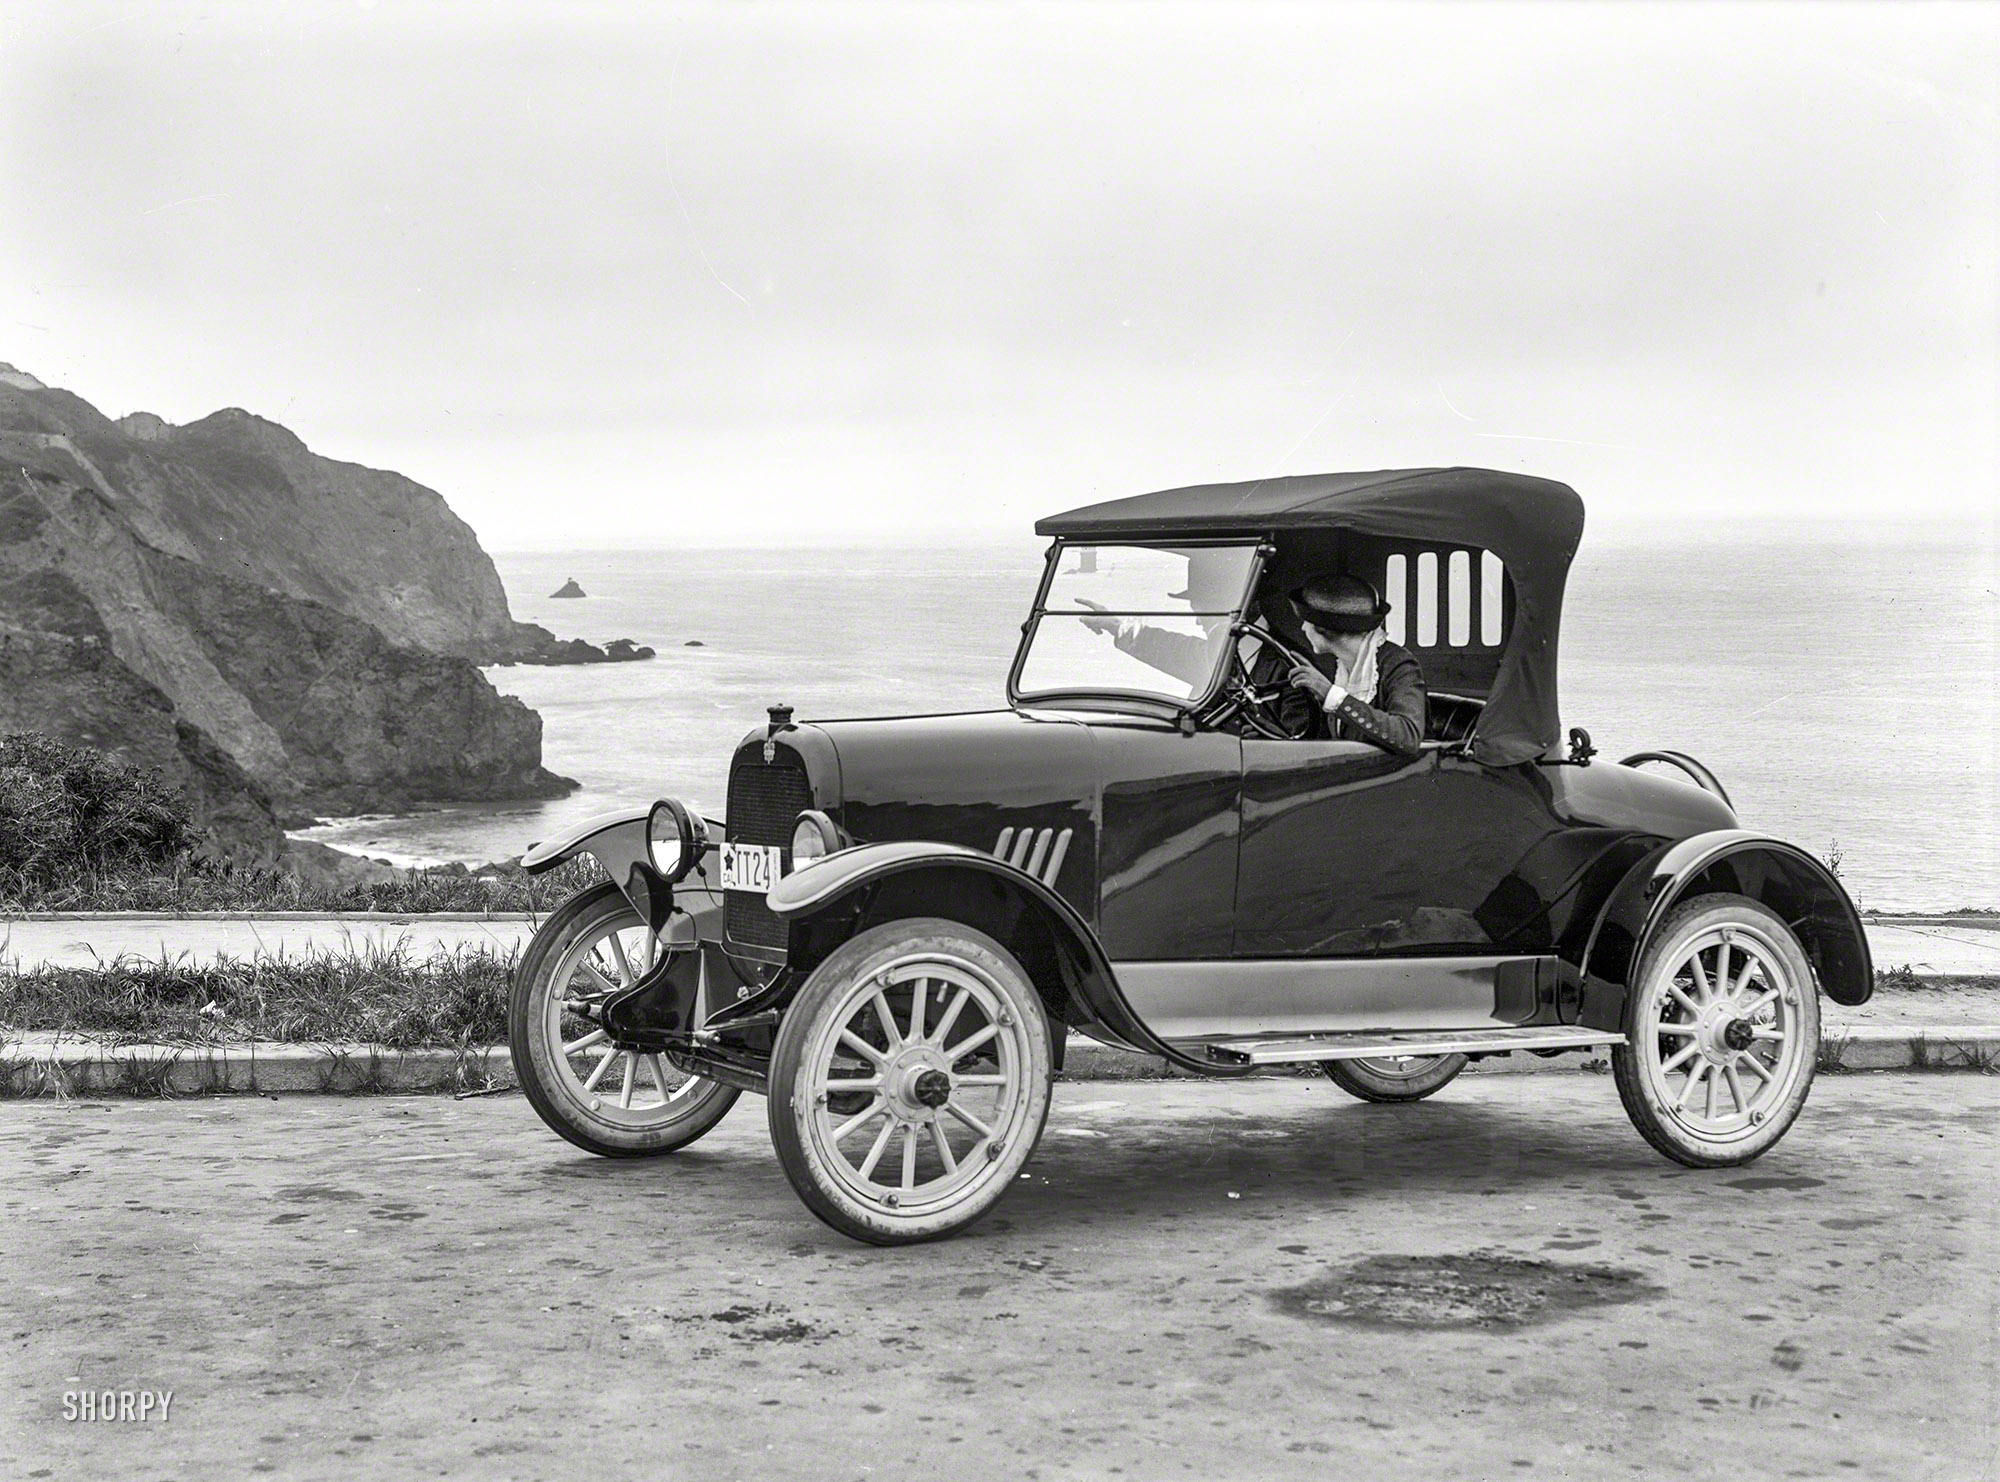 San Francisco circa 1919. "Briscoe auto at Lands End." Latest entry in the Shorpy Dossier of Dead-Ends. 5x7 glass negative by Christopher Helin. View full size.